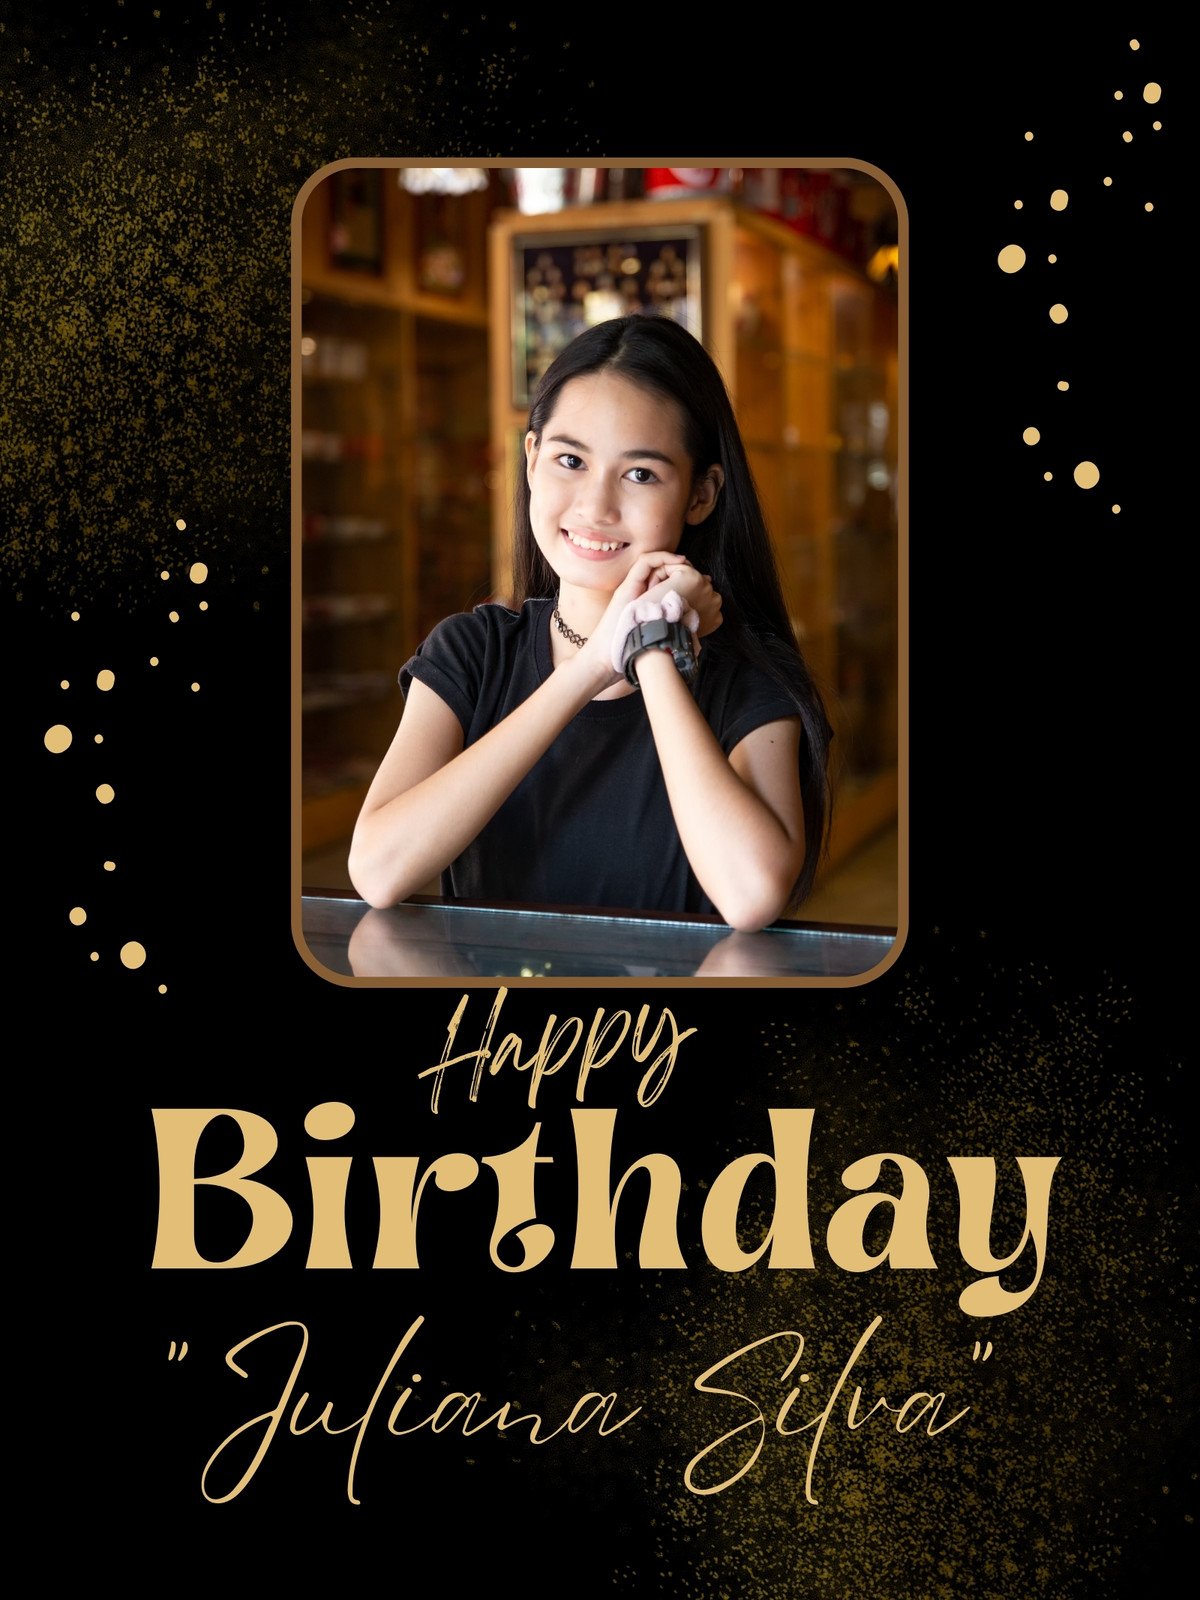 Free And Fun Birthday Poster Templates To Customize | Canva